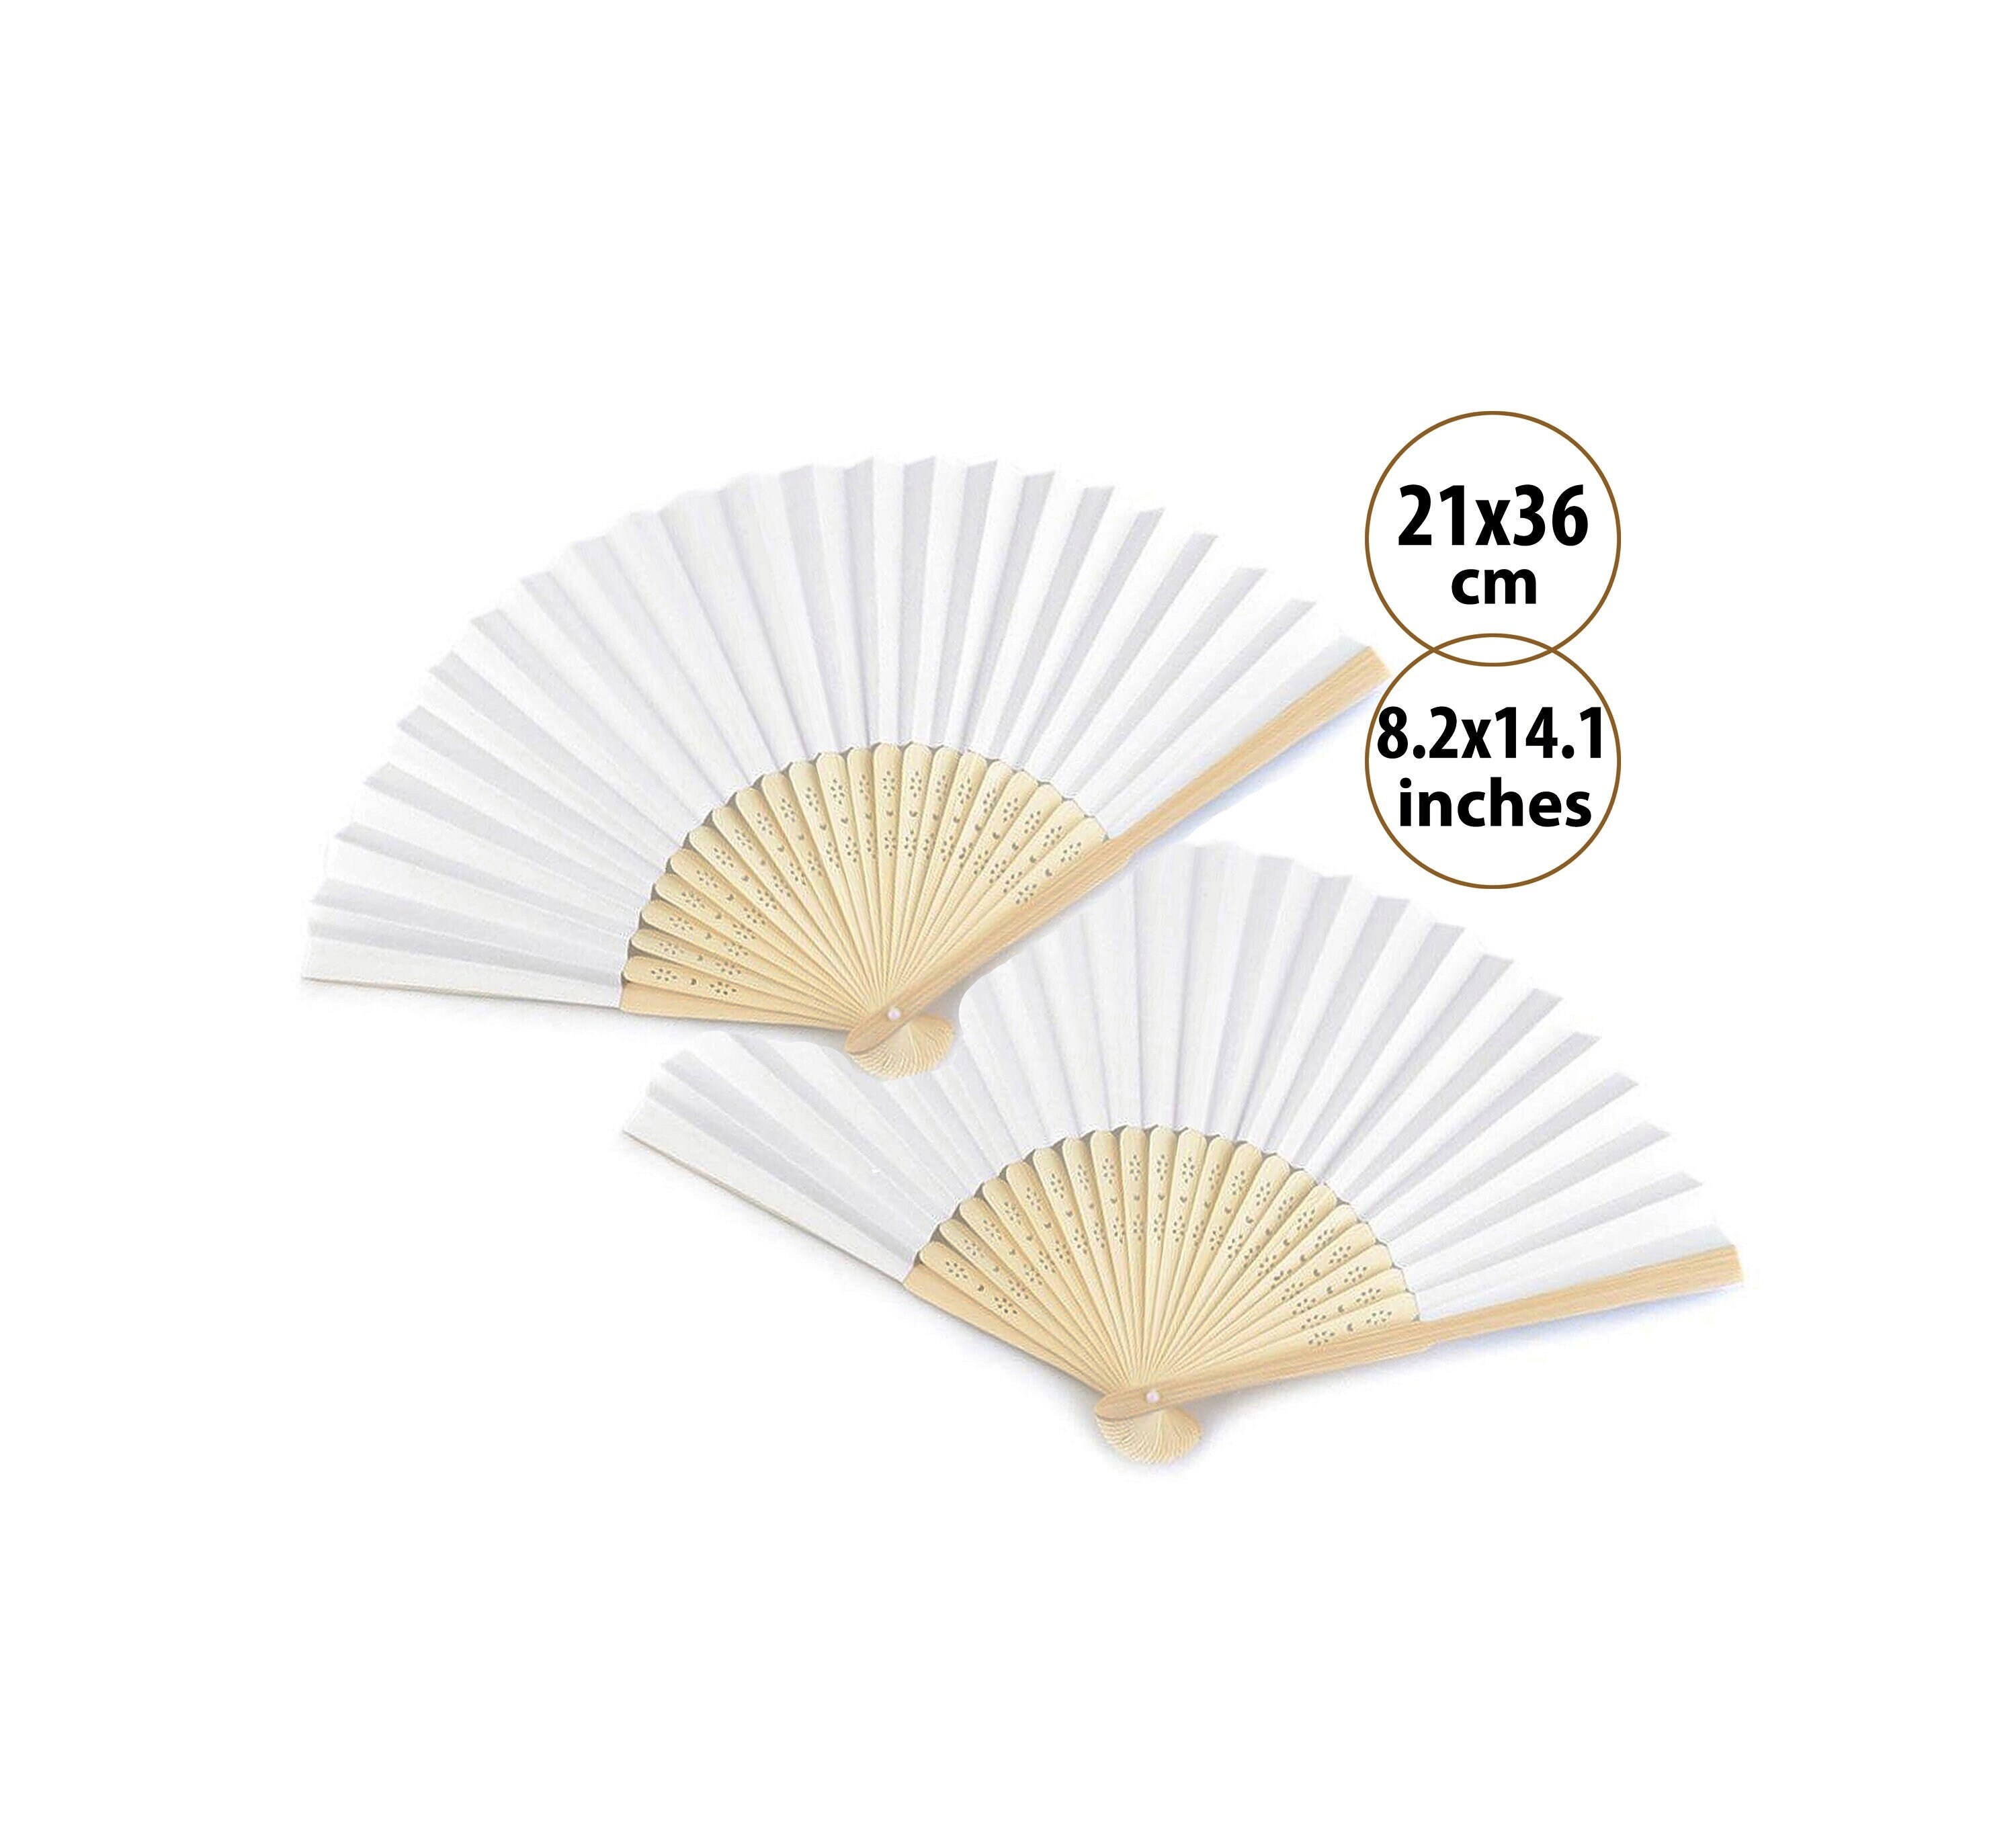 Fan Handle, Craft Stick, Wooden Paddle Kit for Wedding, Program, Auction Bidding, Paint, Popsicle; Jumbo Pack 300 Piece Count; by Mandala Crafts